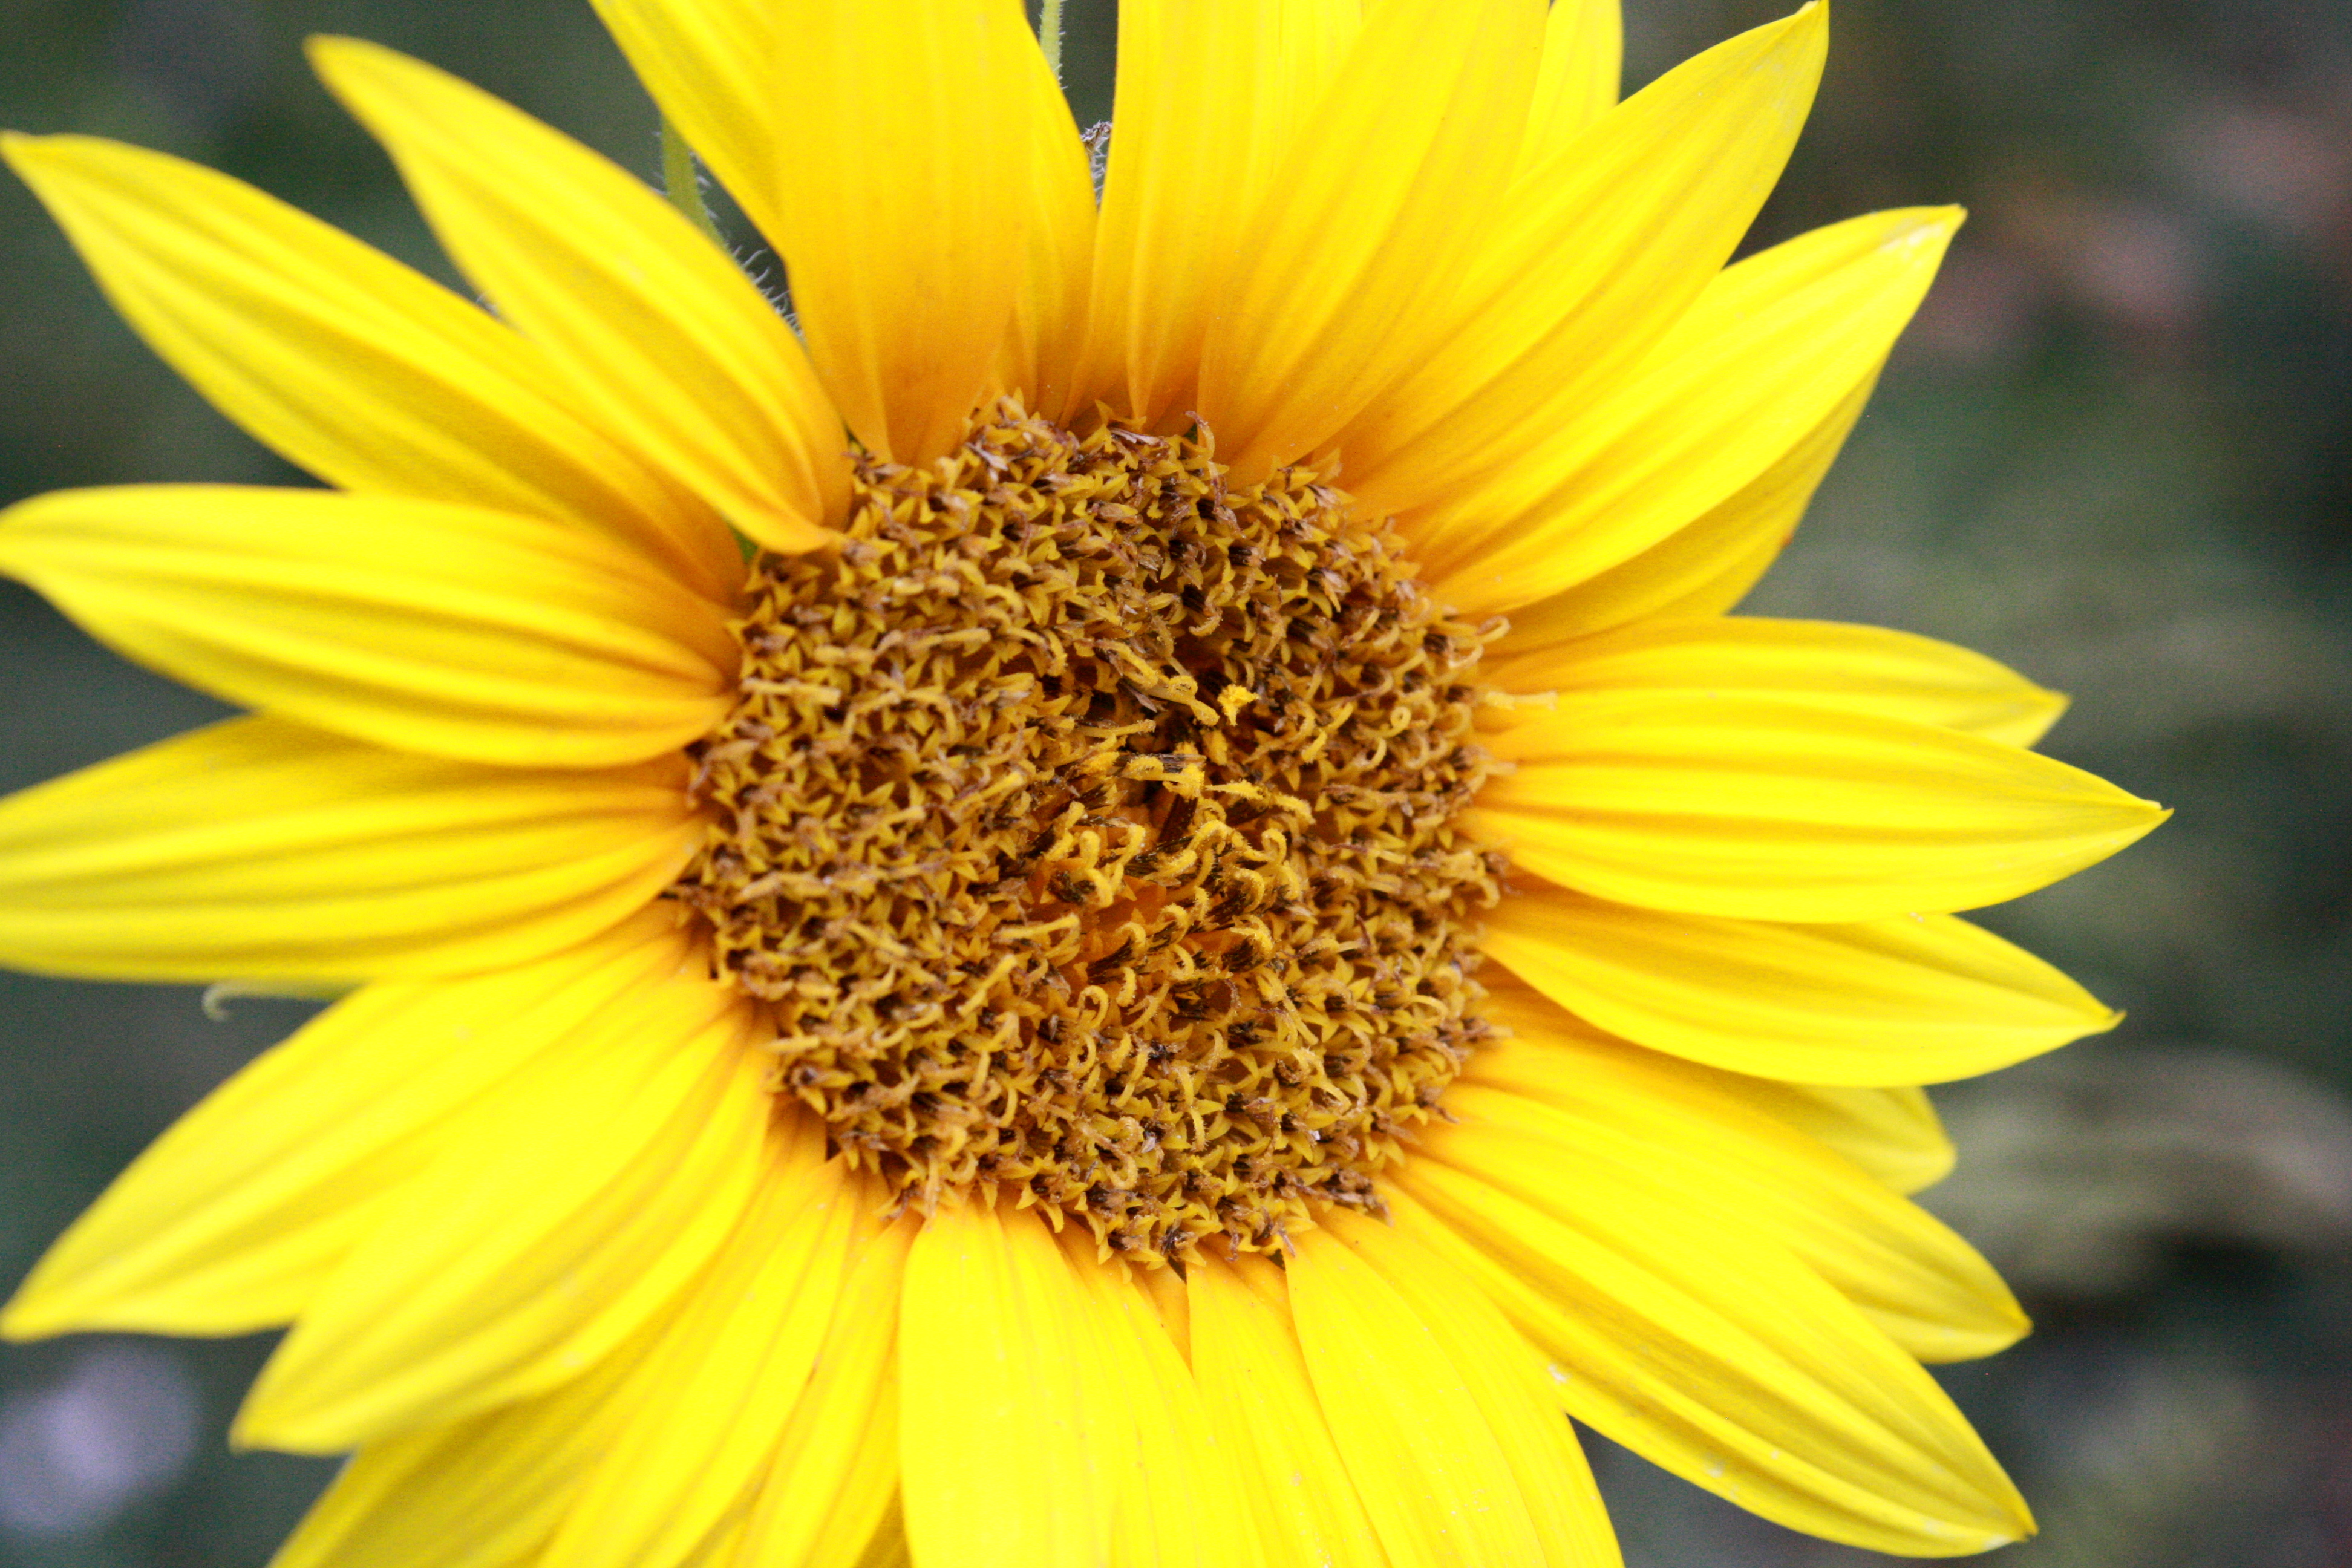 sun flower pictures free download